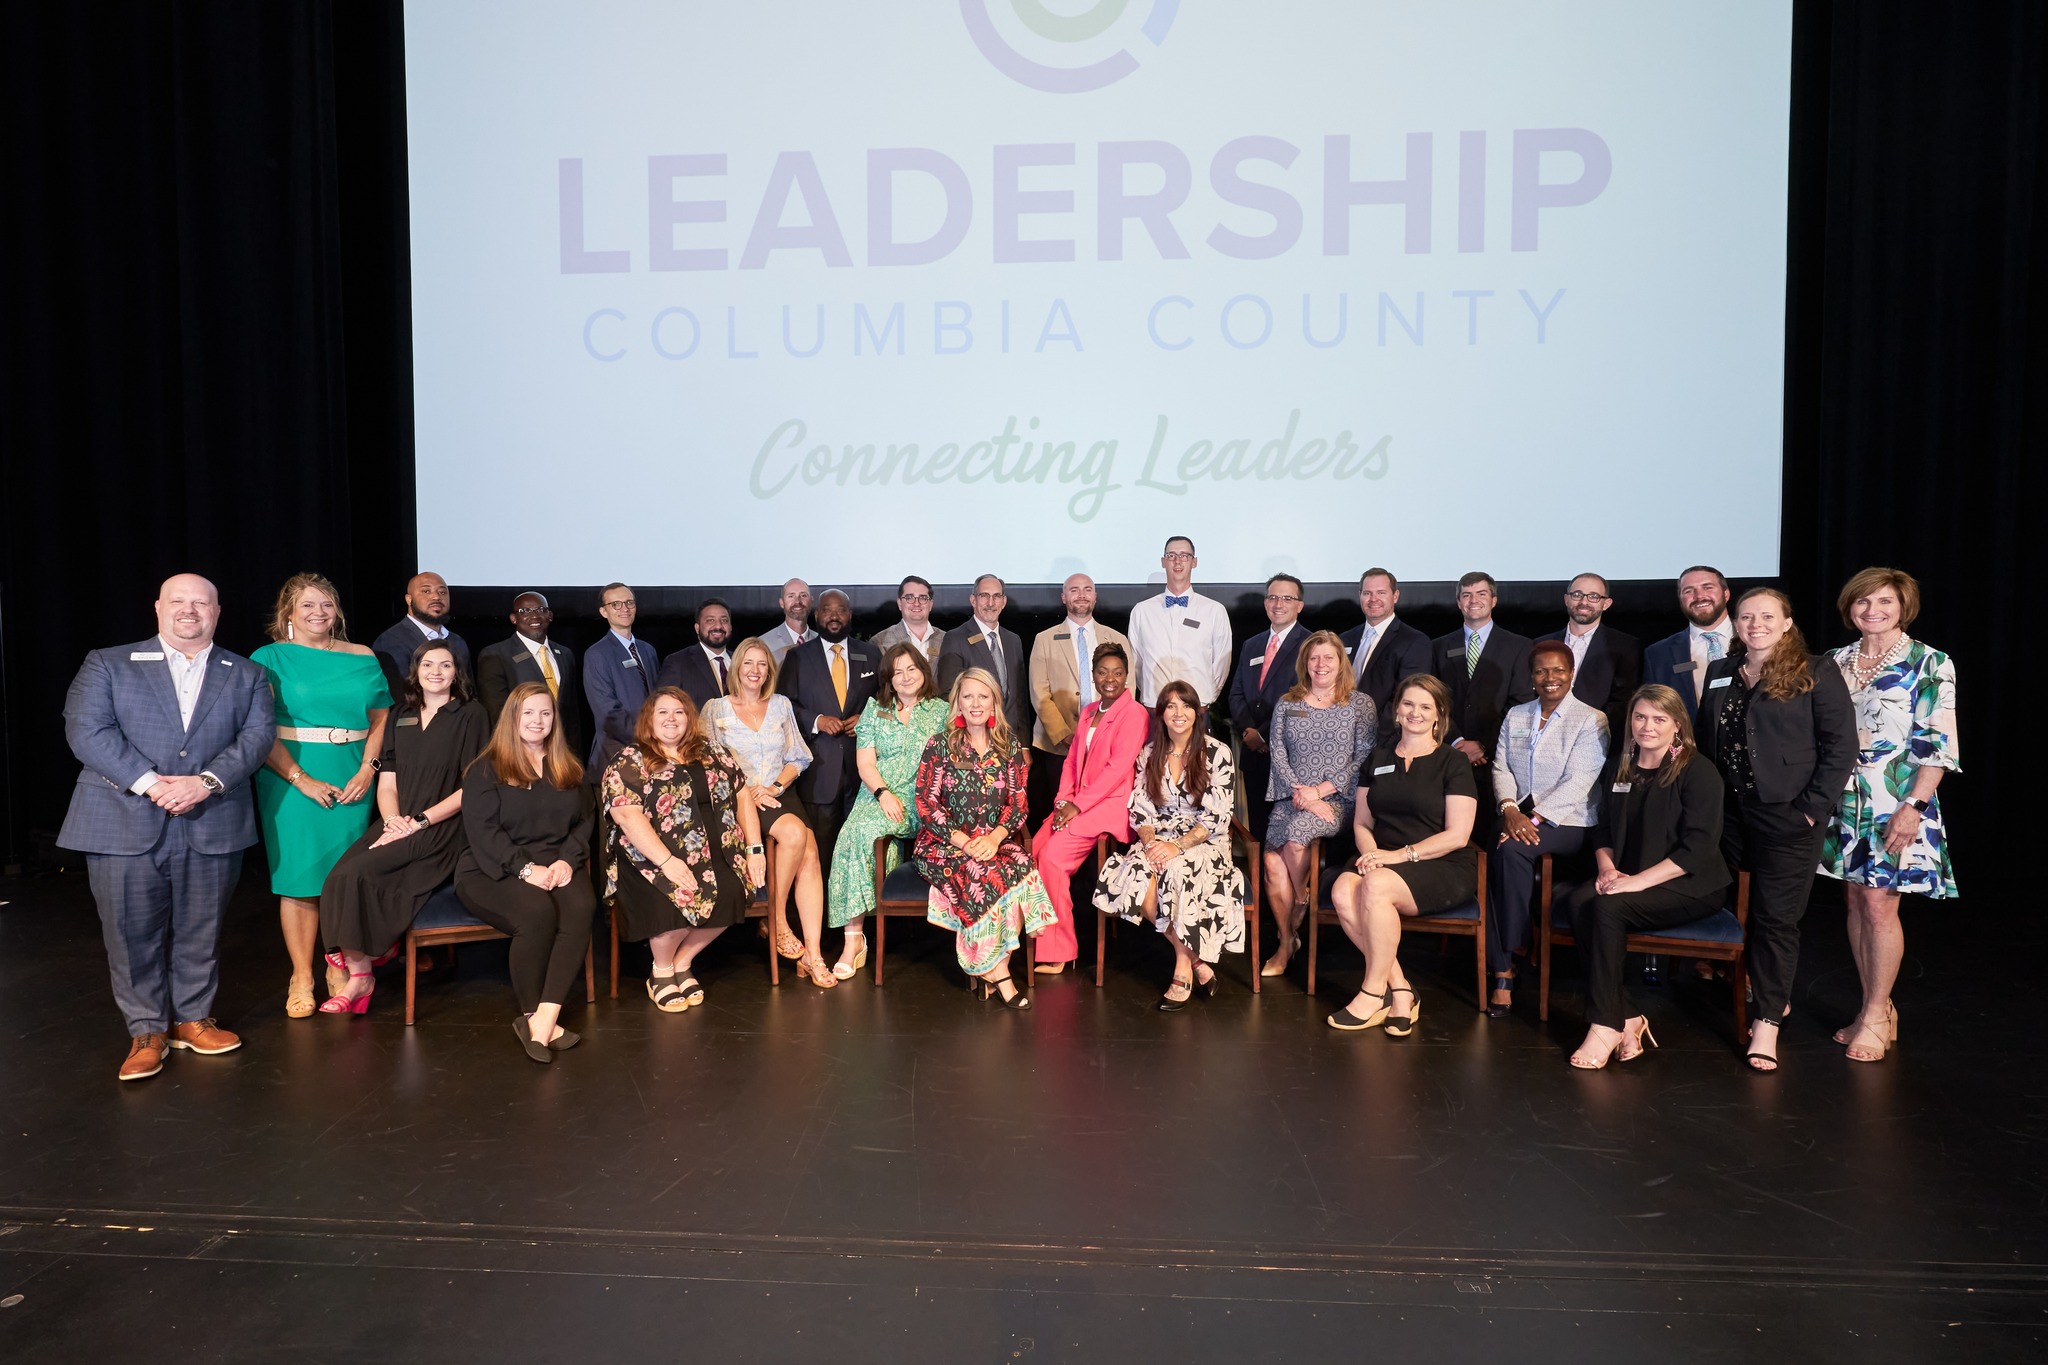 Congratulations to the Leadership Columbia County Class of 2023